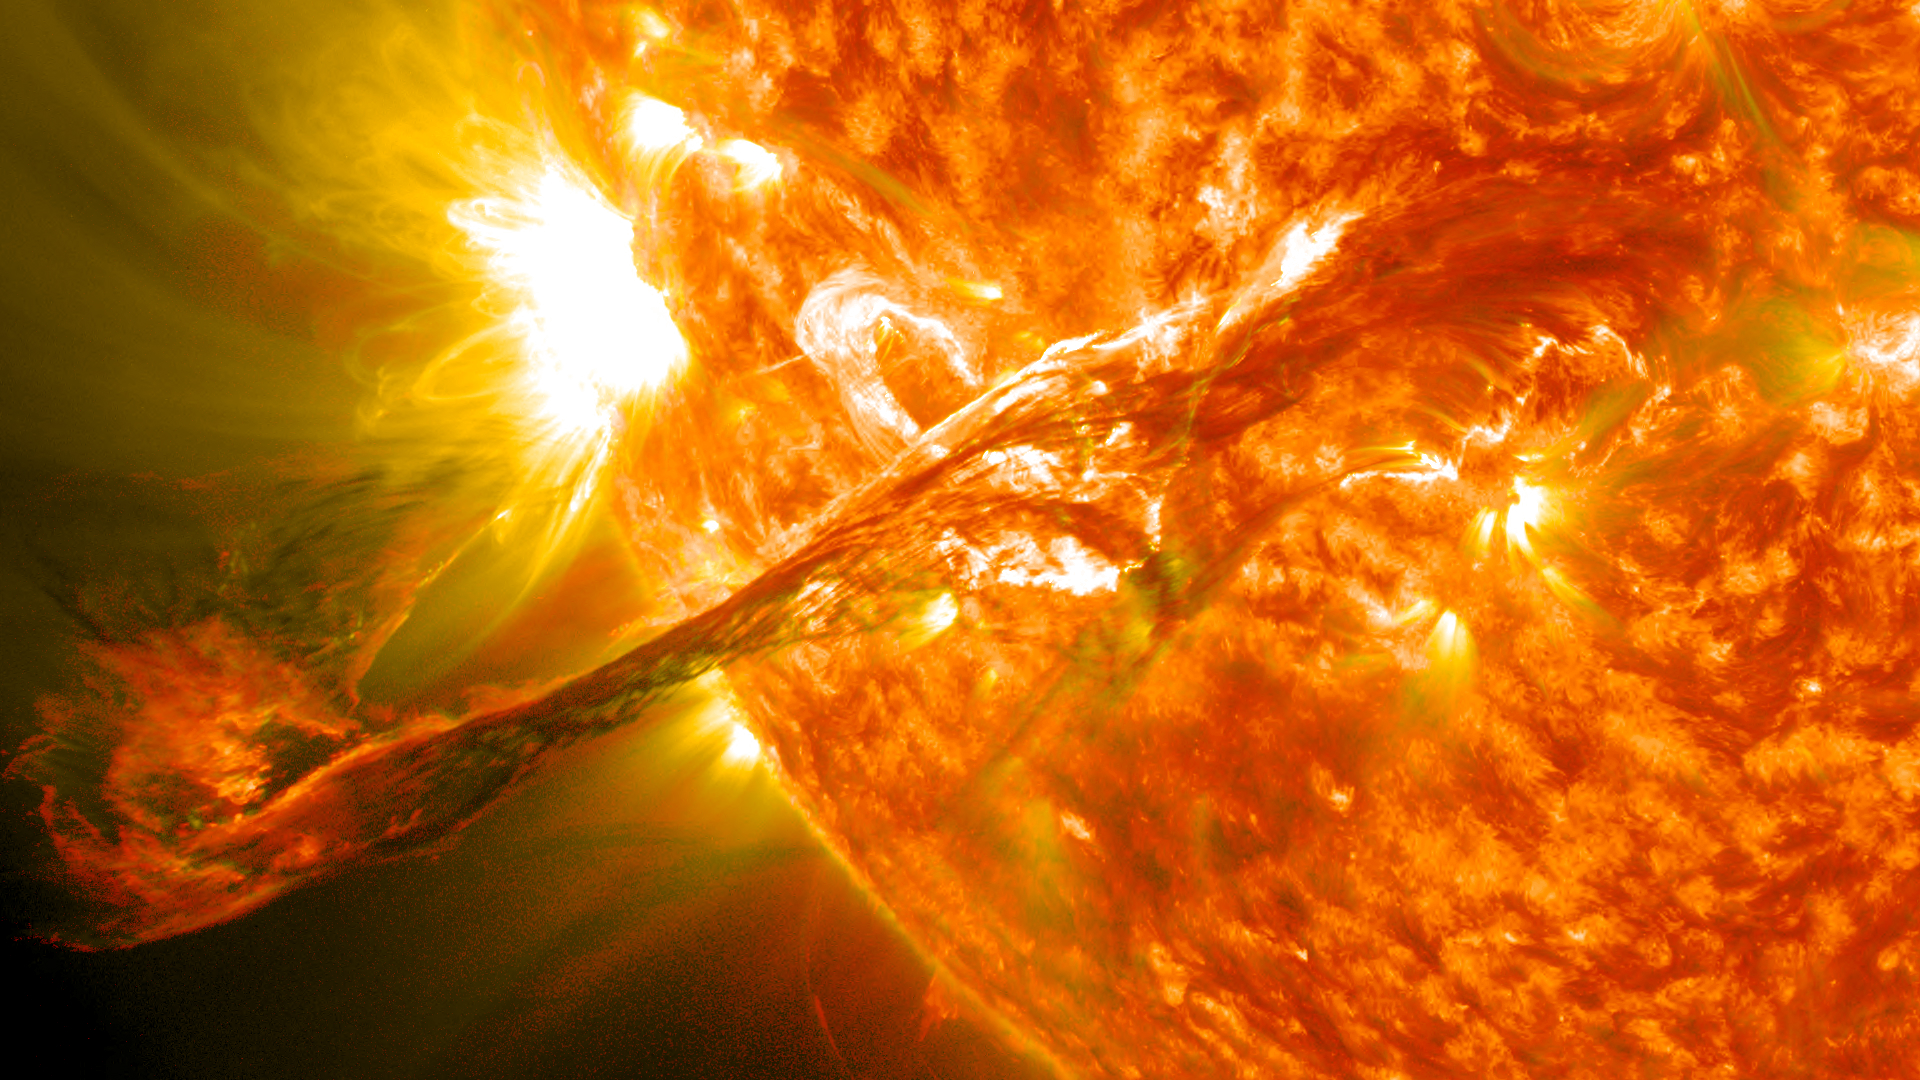 File:Magnificent CME Erupts on the Sun - August 31.jpg - Wikipedia ...